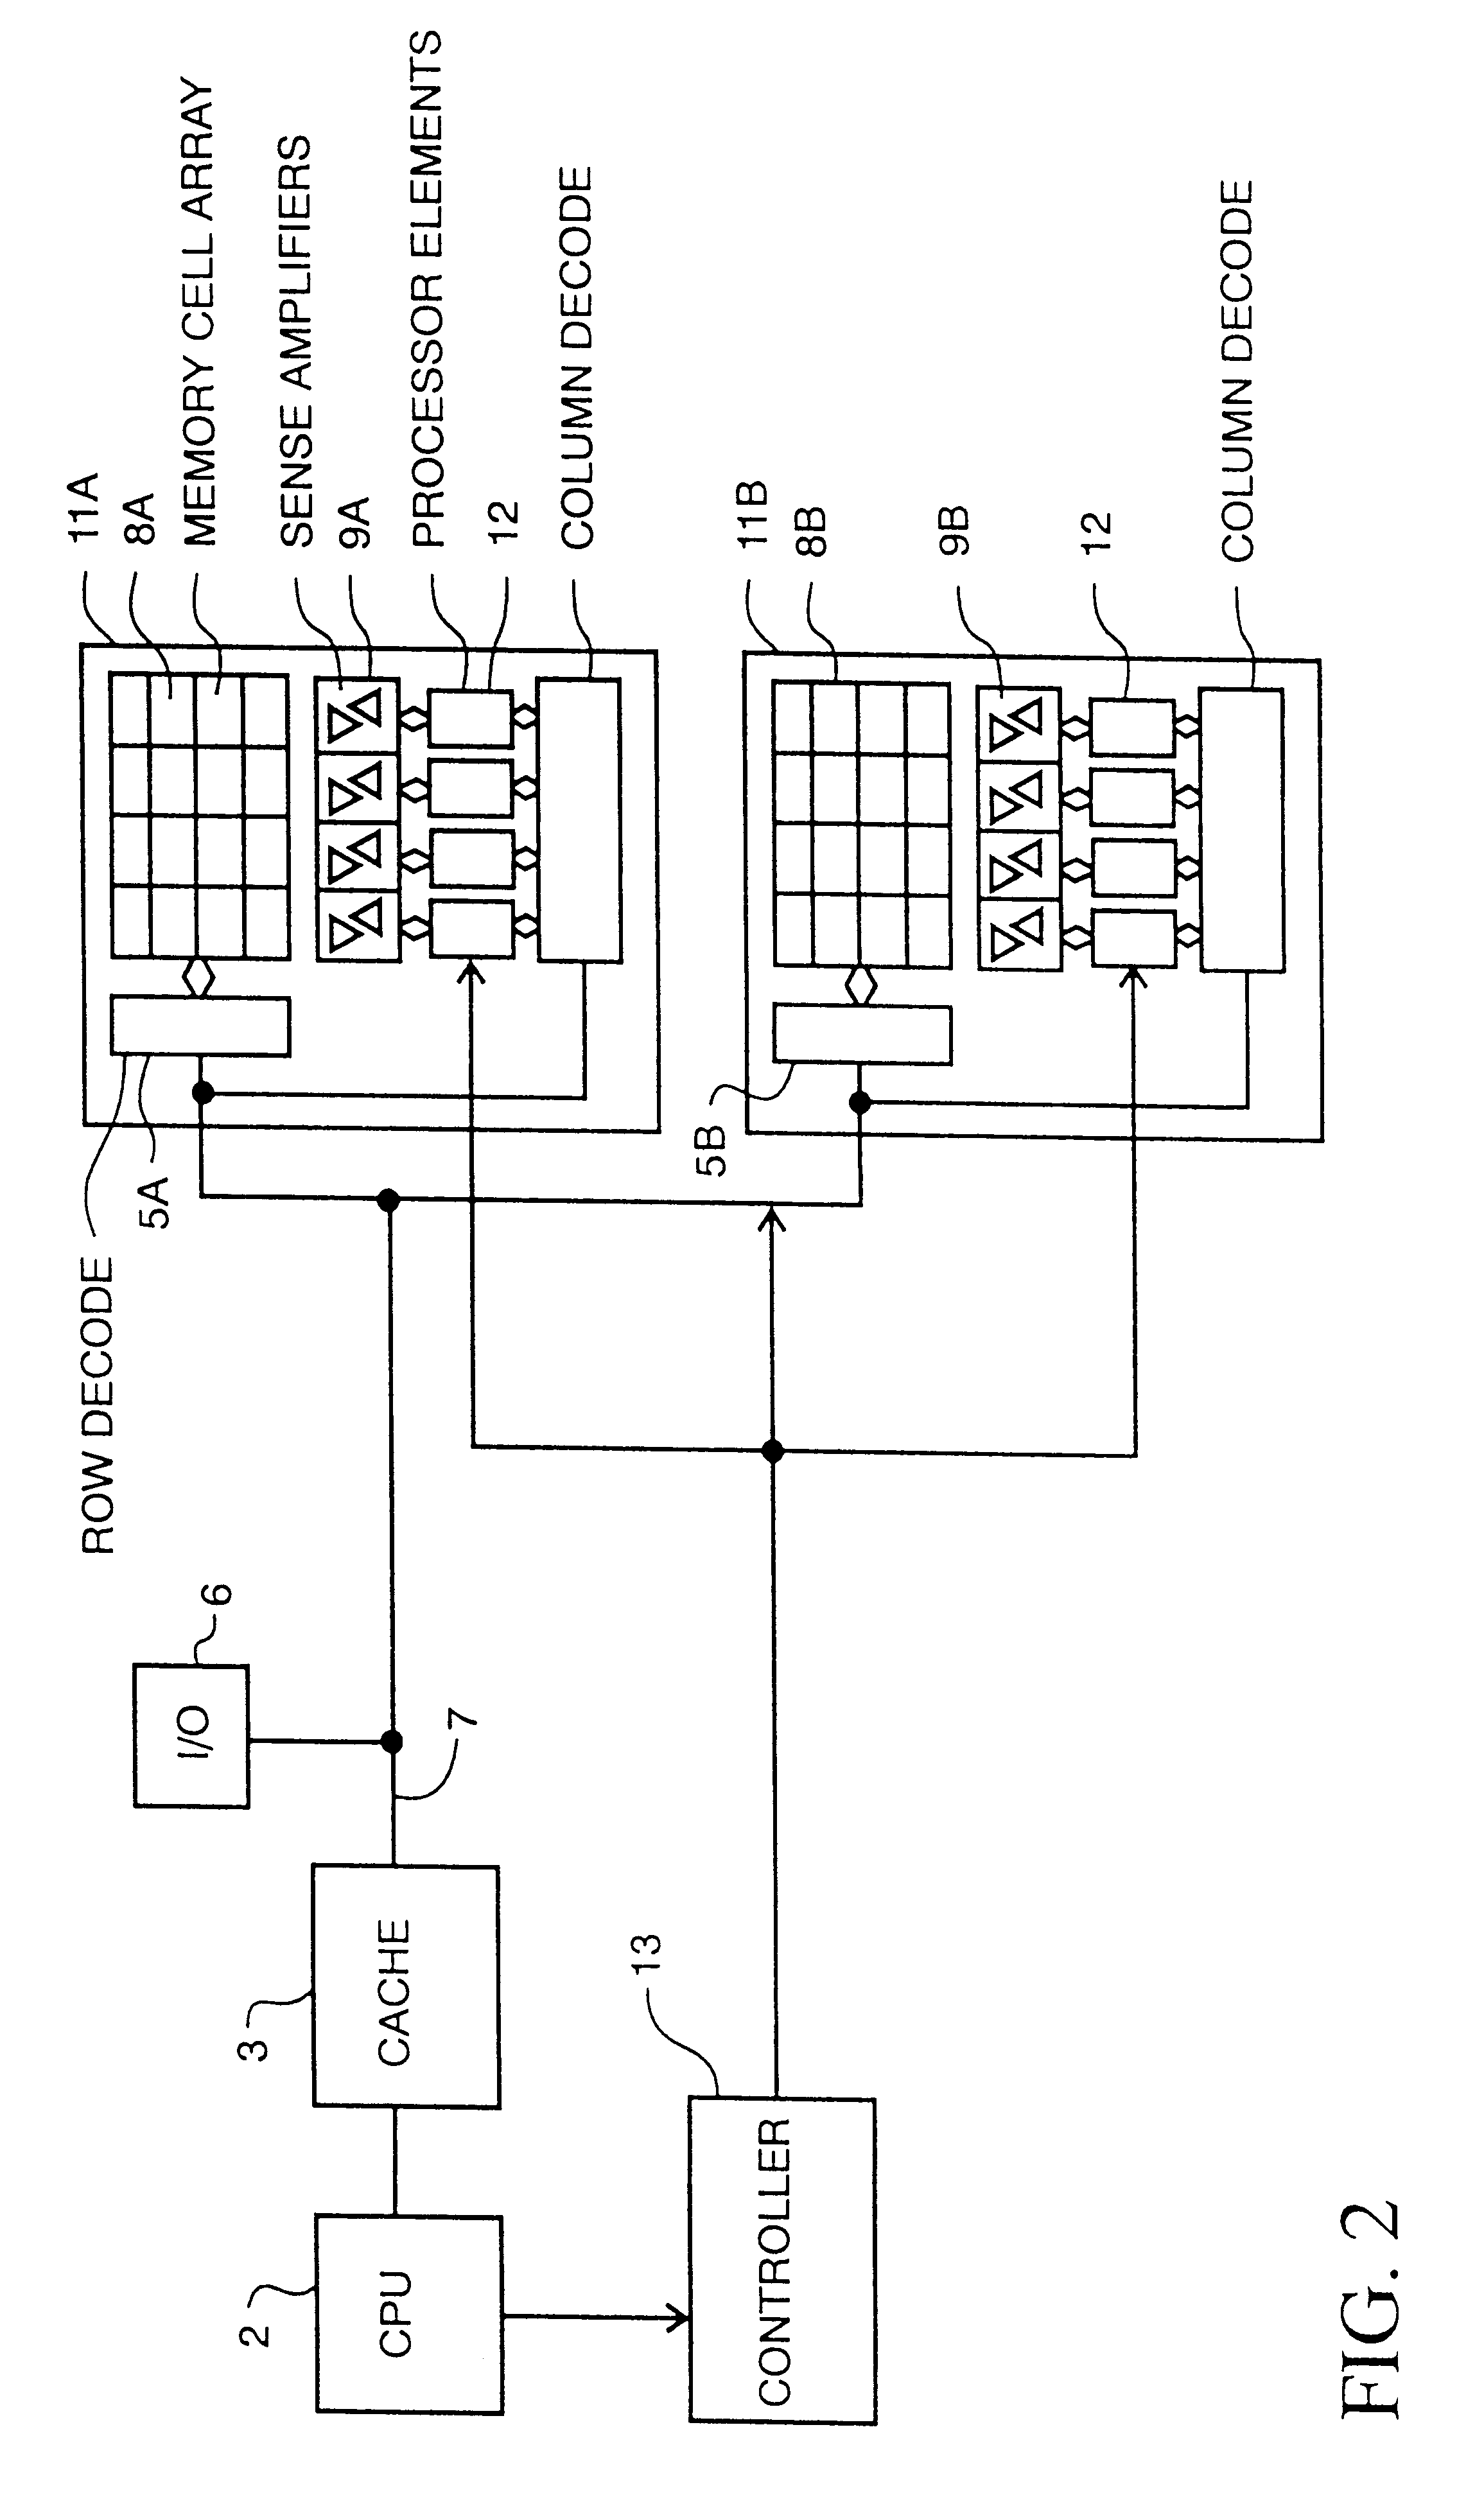 Memory device with multiple processors having parallel access to the same memory area